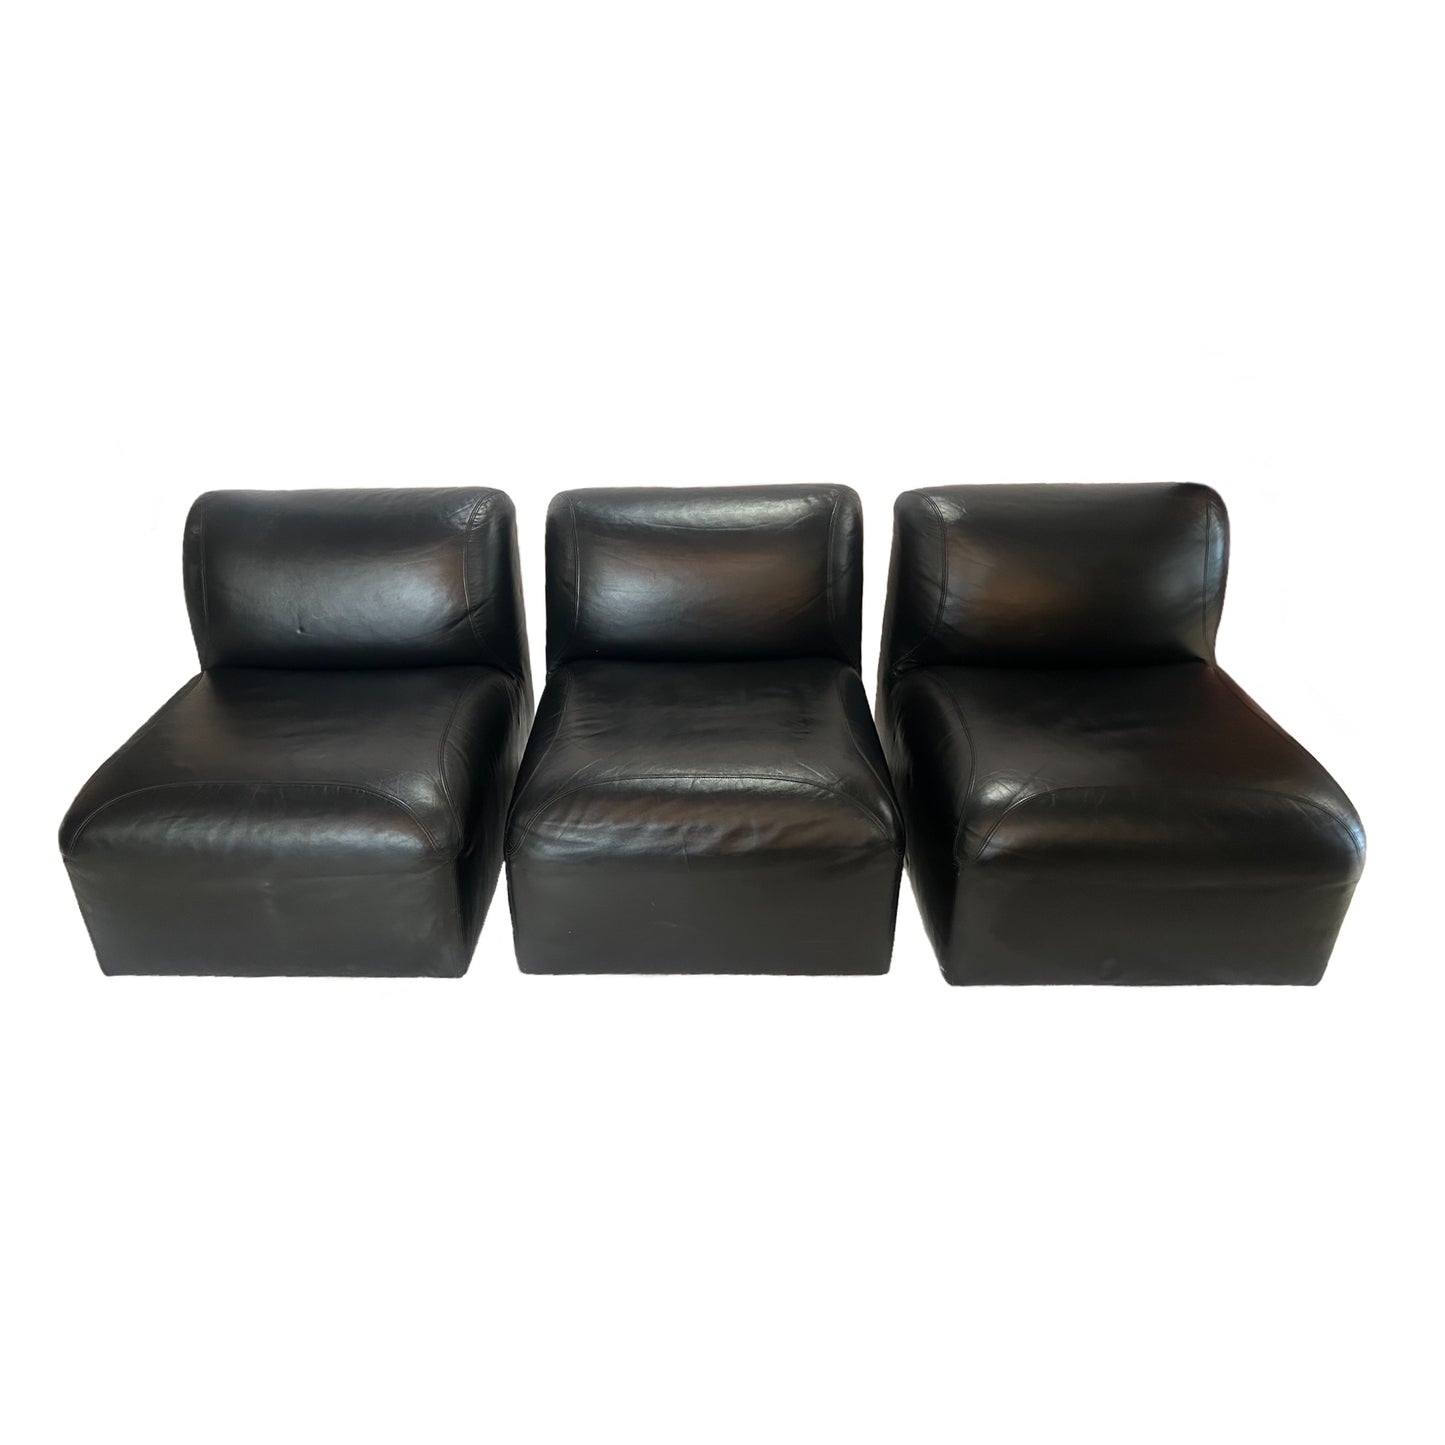 James Hill & Co. 3 Piece Leather Chairs